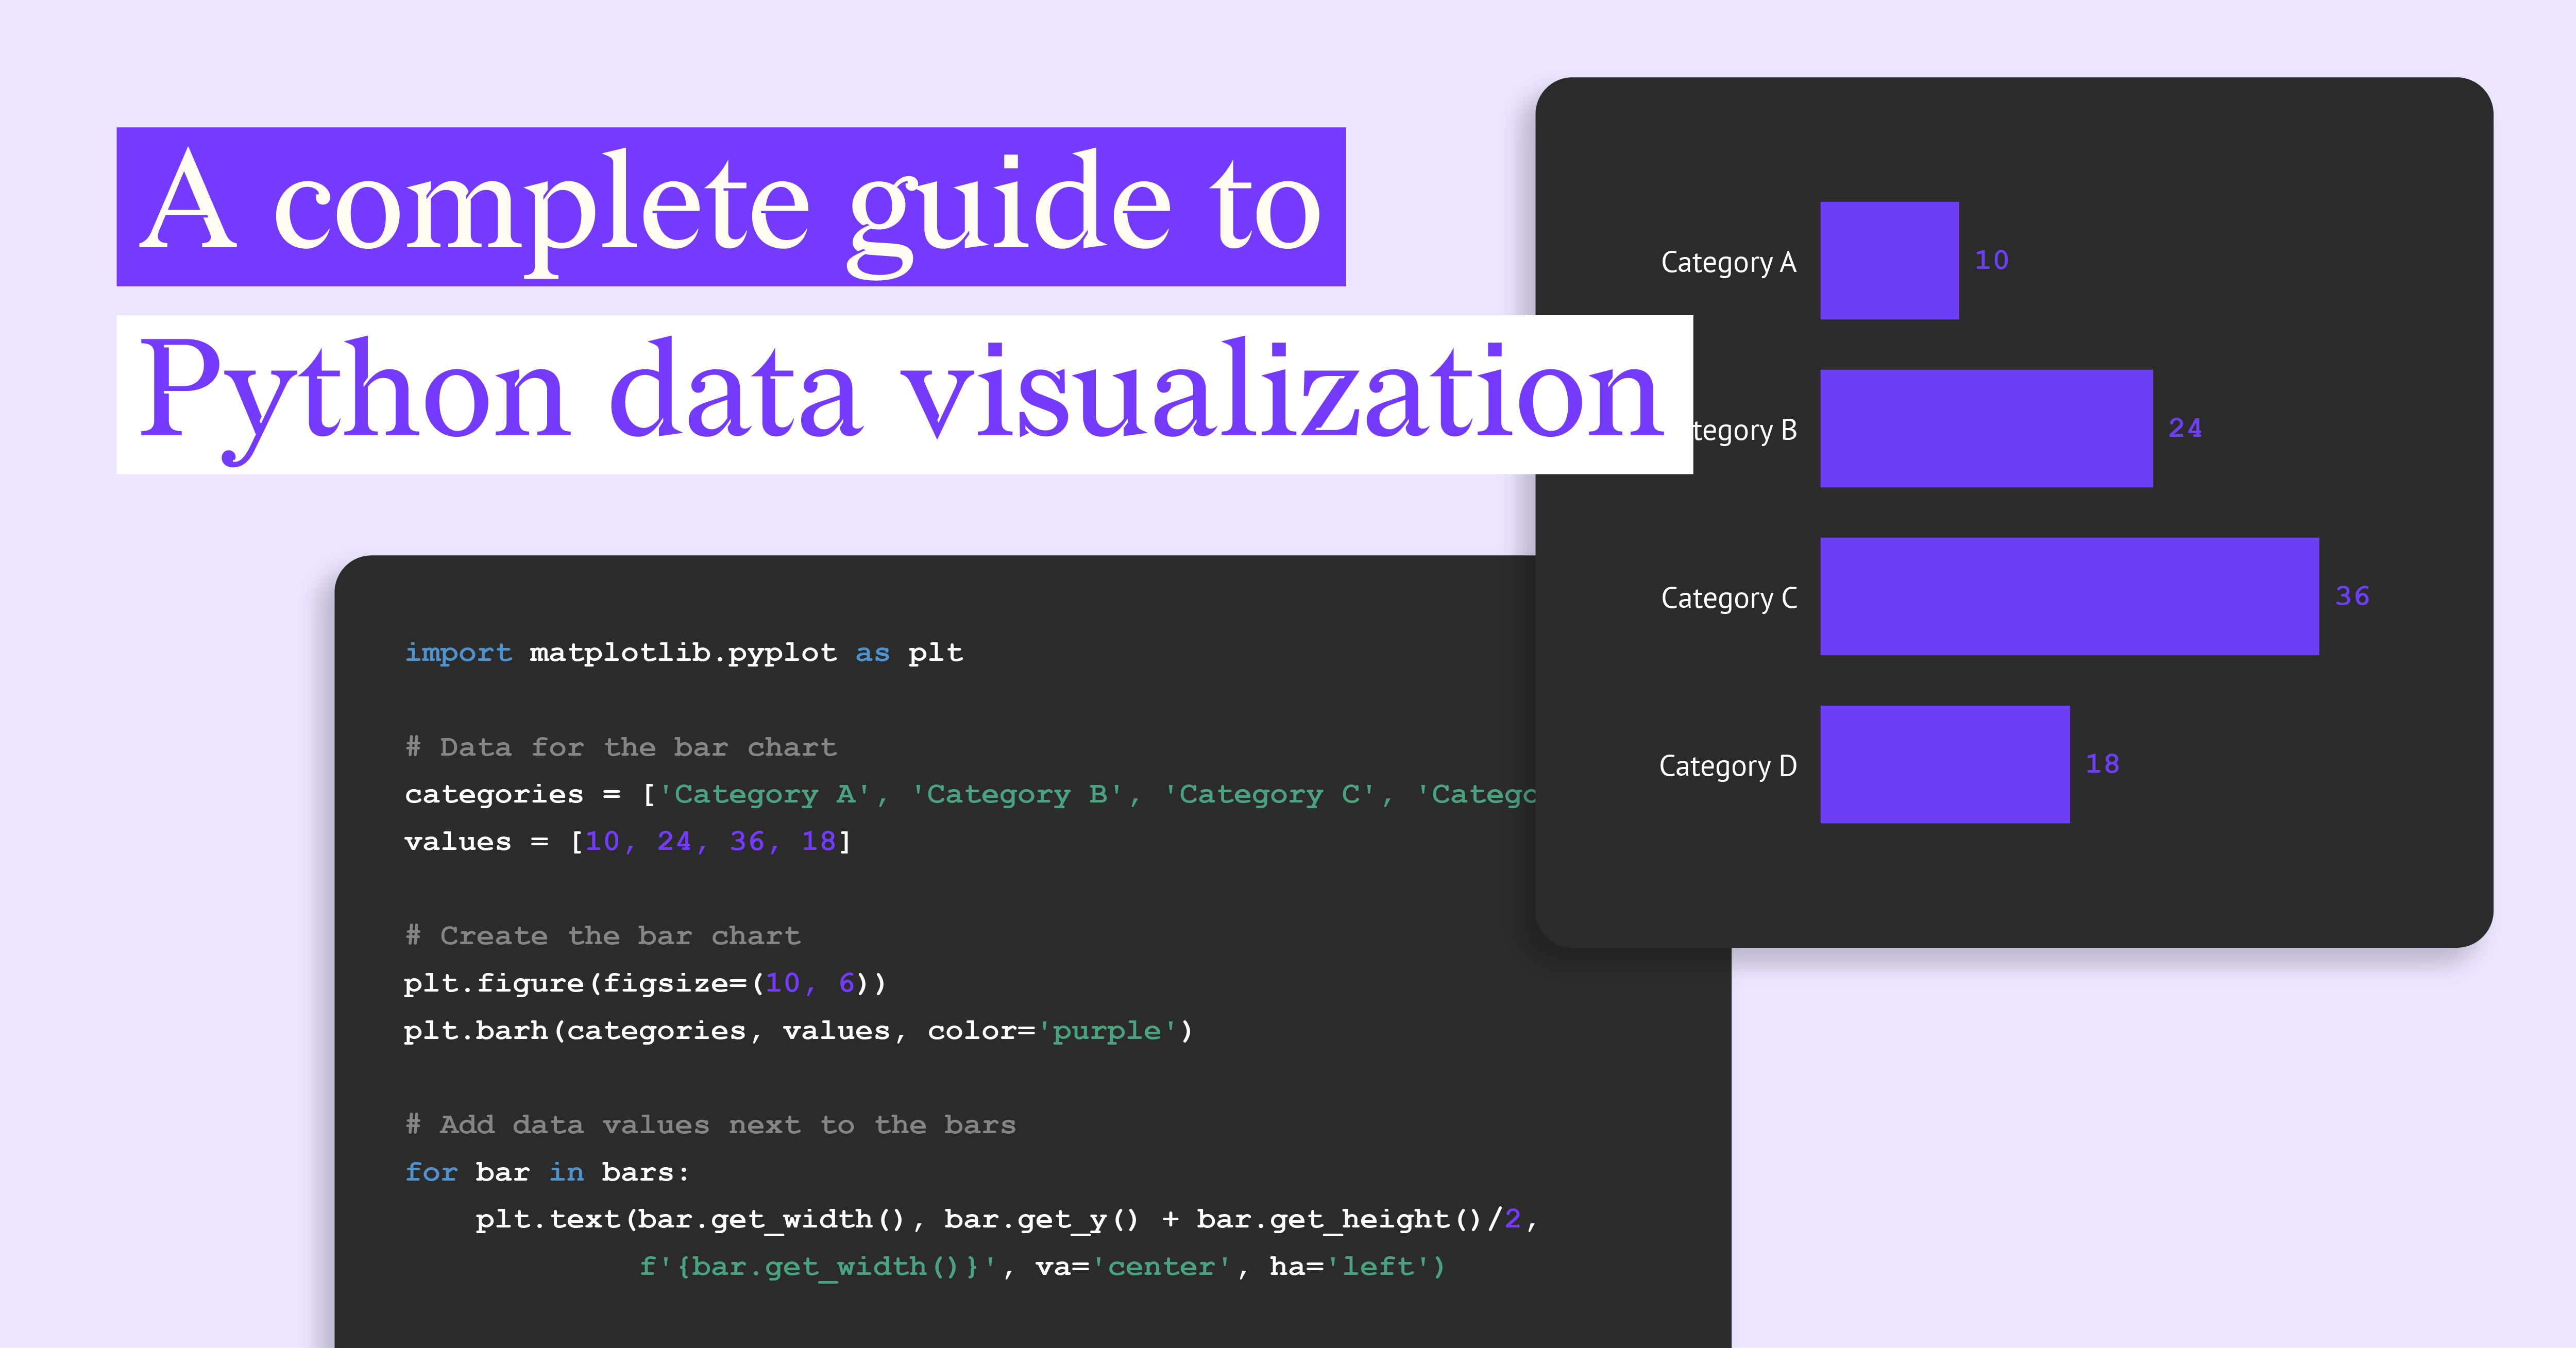 datylon-blog-A-Complete-Guide-To-Python-Data-Visualization-featured-image